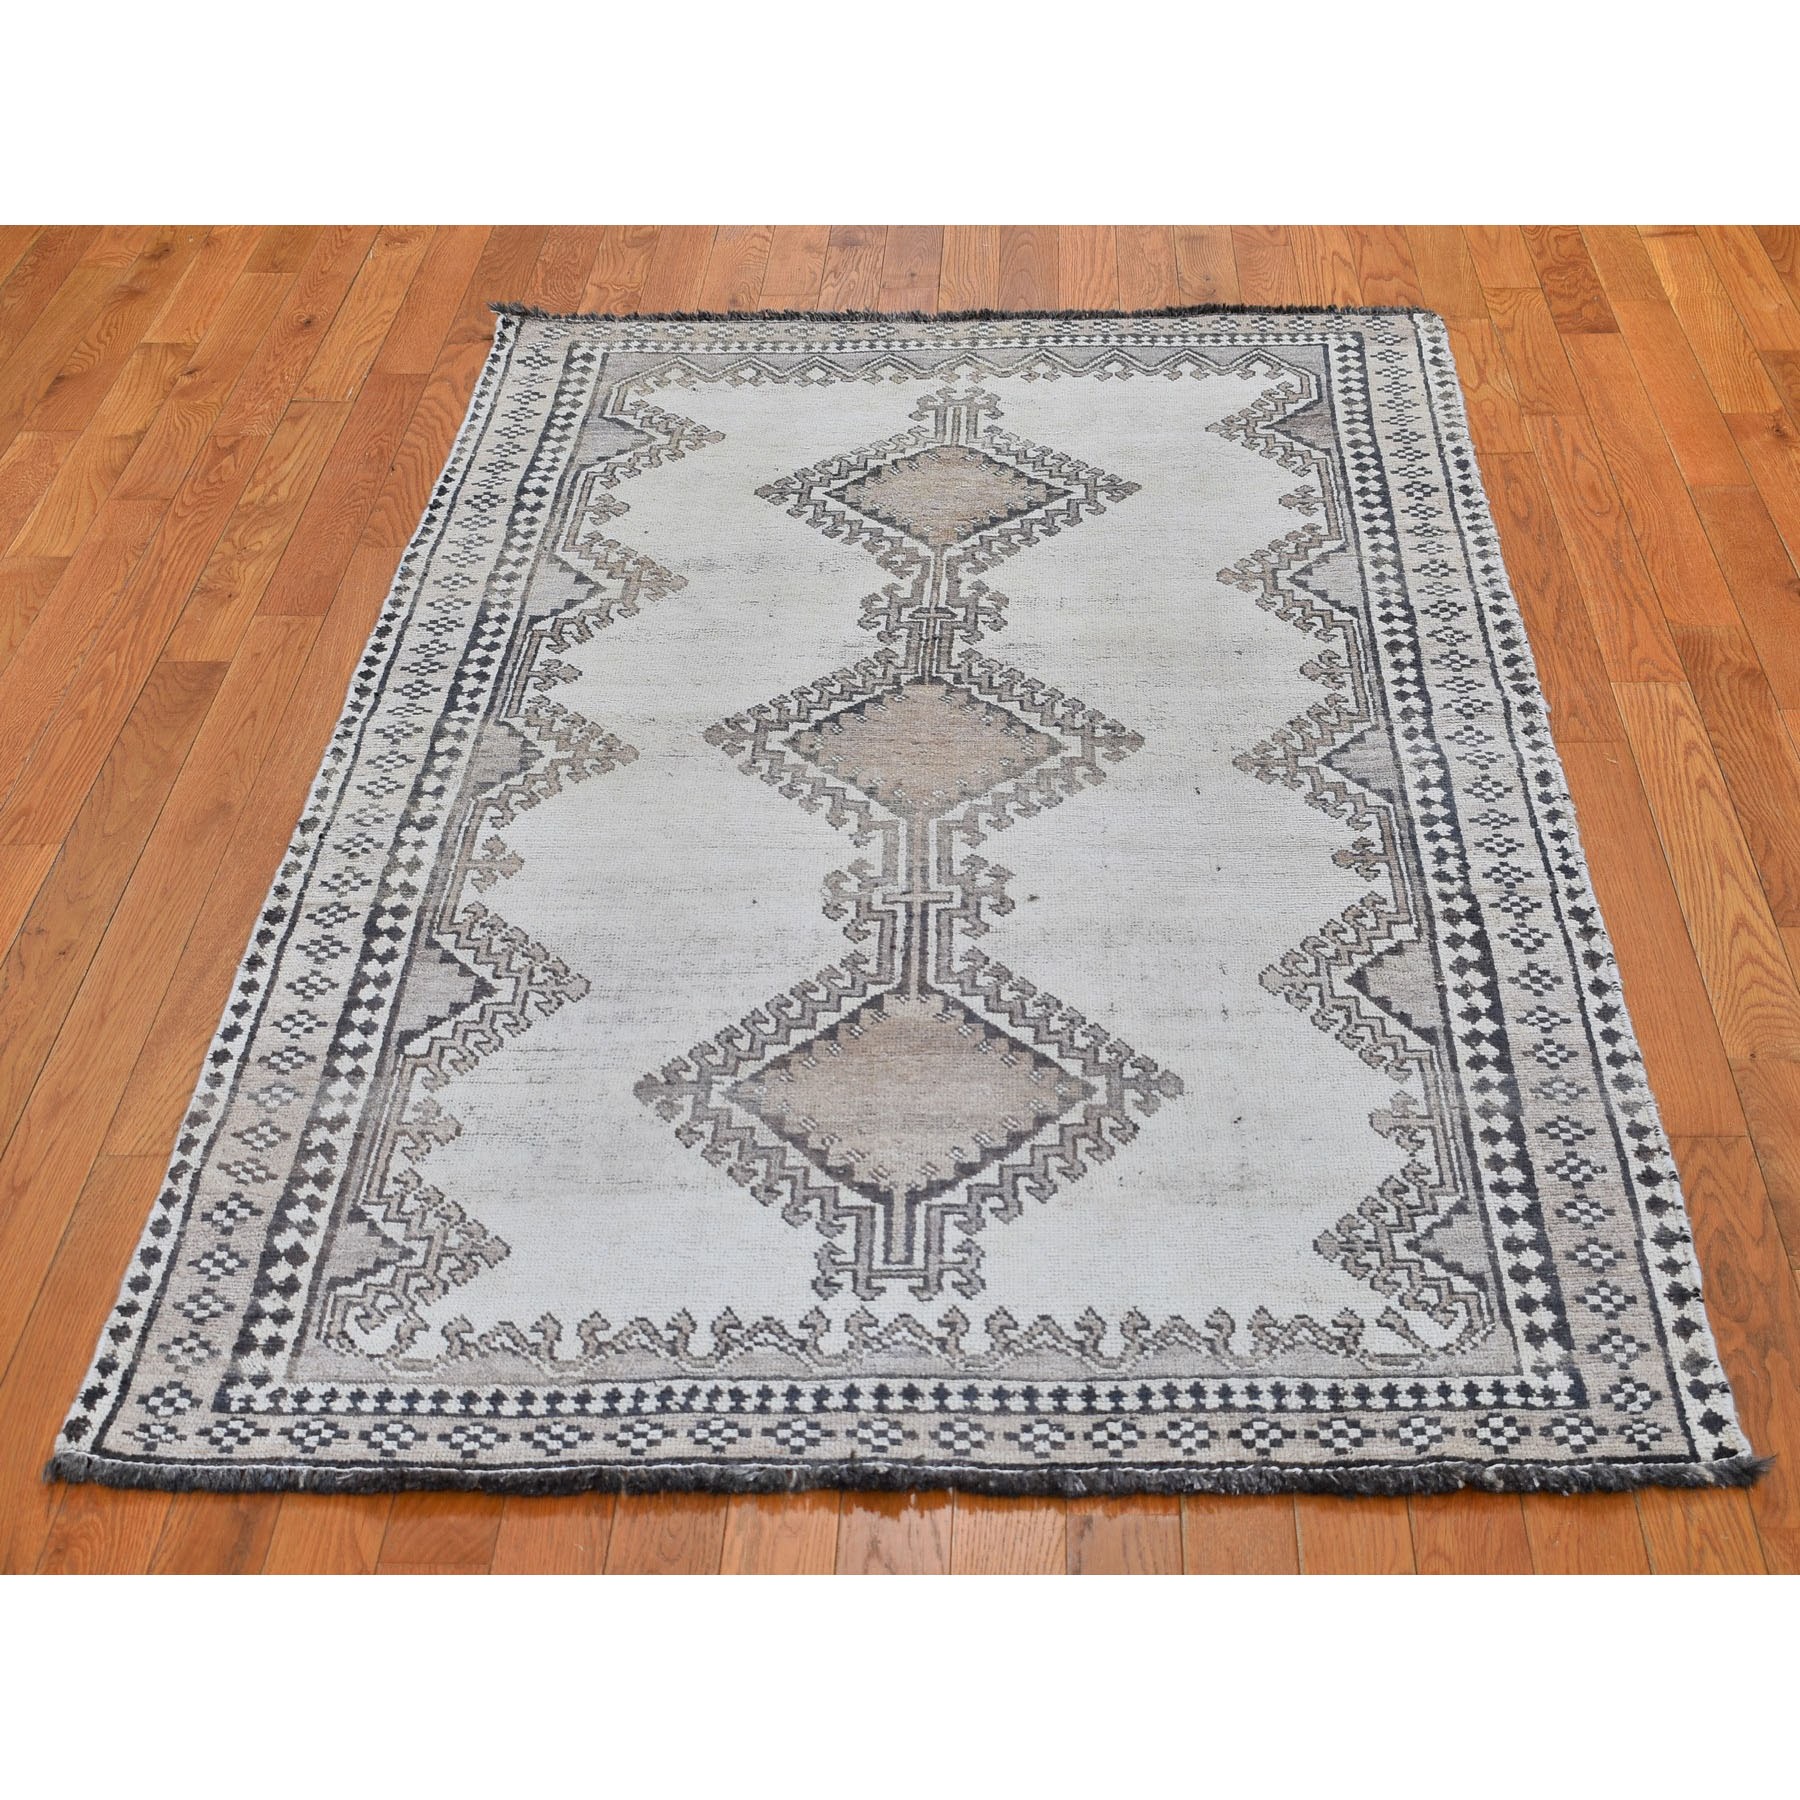 4-2 x6-8  Afghan Baluch Natural Colors Hand-Knotted Pure Wool Oriental Rug 